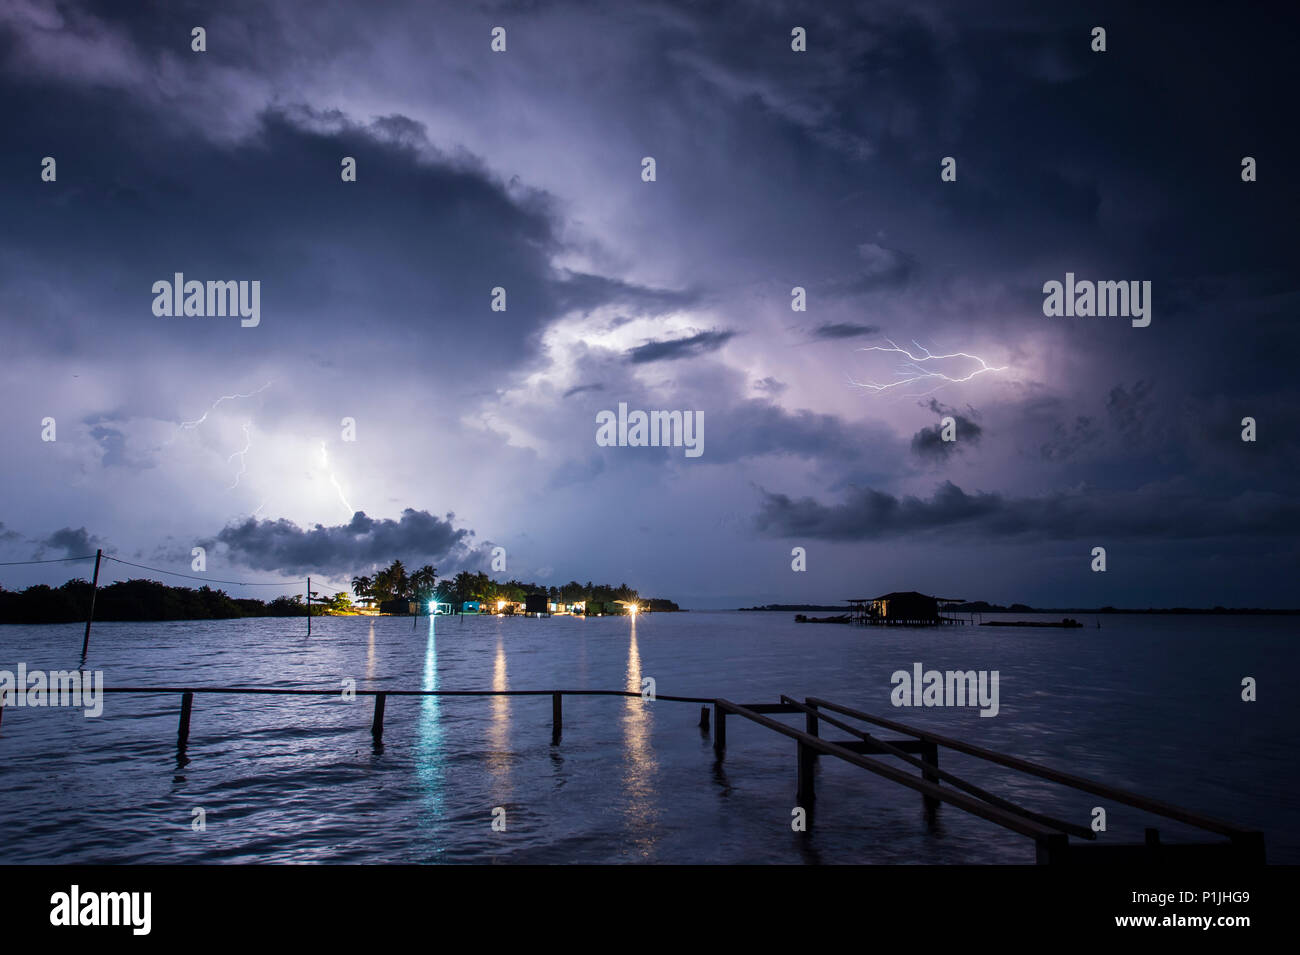 Cloud-to-ground and crawler lightning discharges above a village of fishermen (Catatumbo thunderstorm, the place with the highest lightning density worldwide), Ologa, Zulia, Venezuela, South America Stock Photo